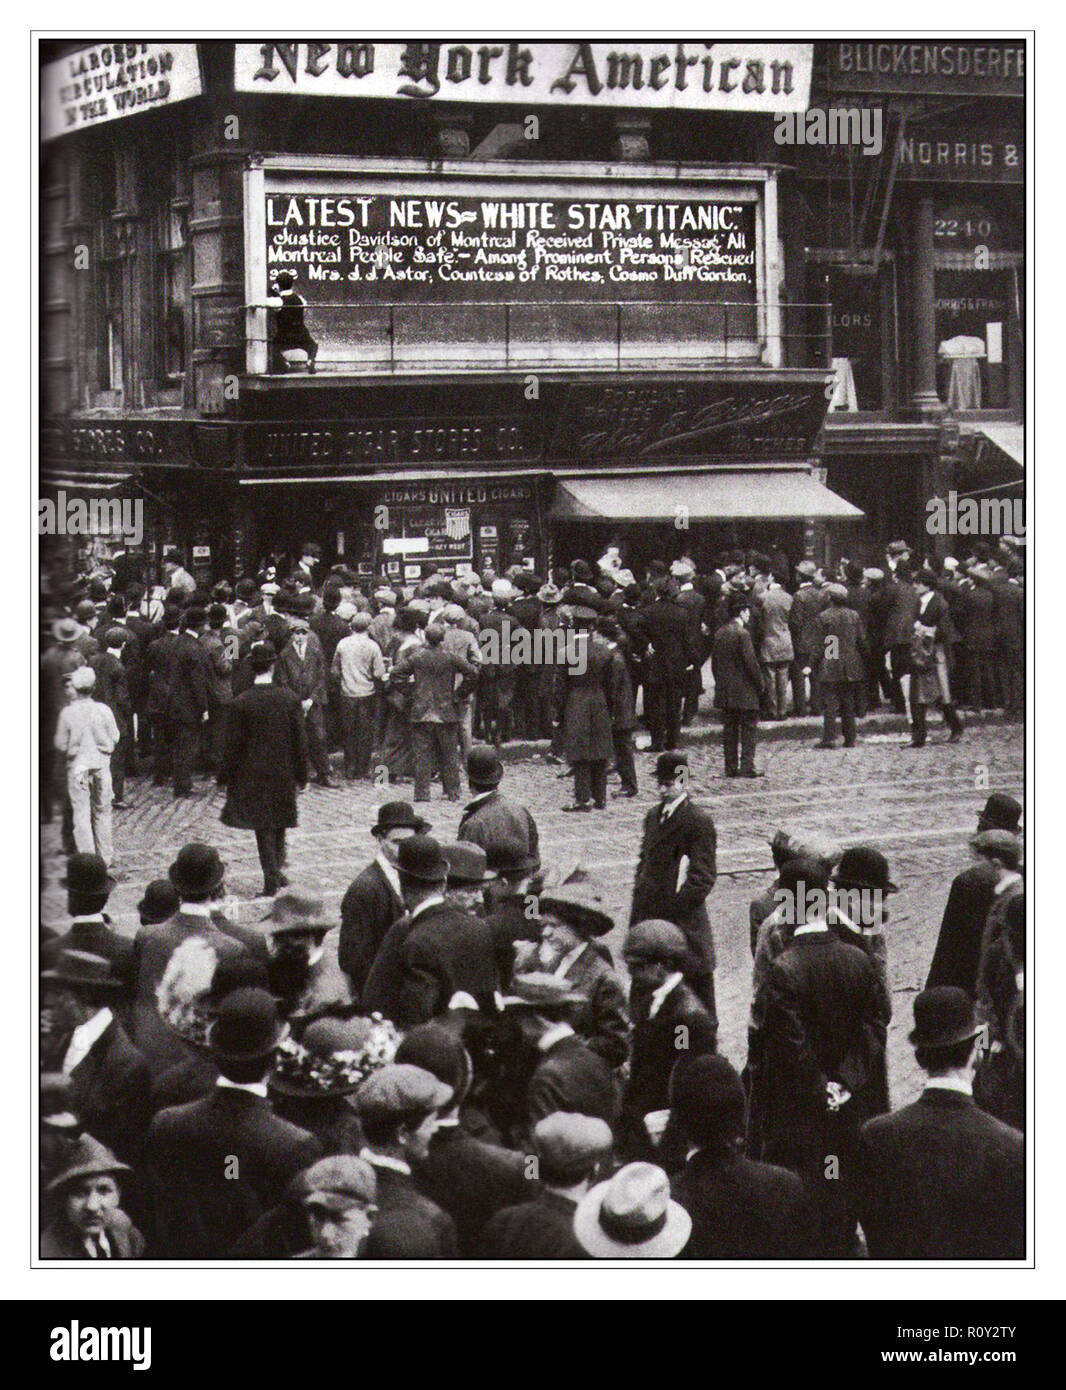 TITANIC NEWS REPORTS TIMES SQUARE New York USA  Reports of  'Titanic' sinking arrive in New York, USA, April 1912. As latest news bulletins of disaster arrived, crowds formed in Times Square New York to read the updating newspaper bulletin boards. Operated by the White Star Line, RMS 'Titanic' struck an iceberg in thick fog off Newfoundland on 14 April 1912. She was the largest ocean liner of her time, and said to be unsinkable. Stock Photo